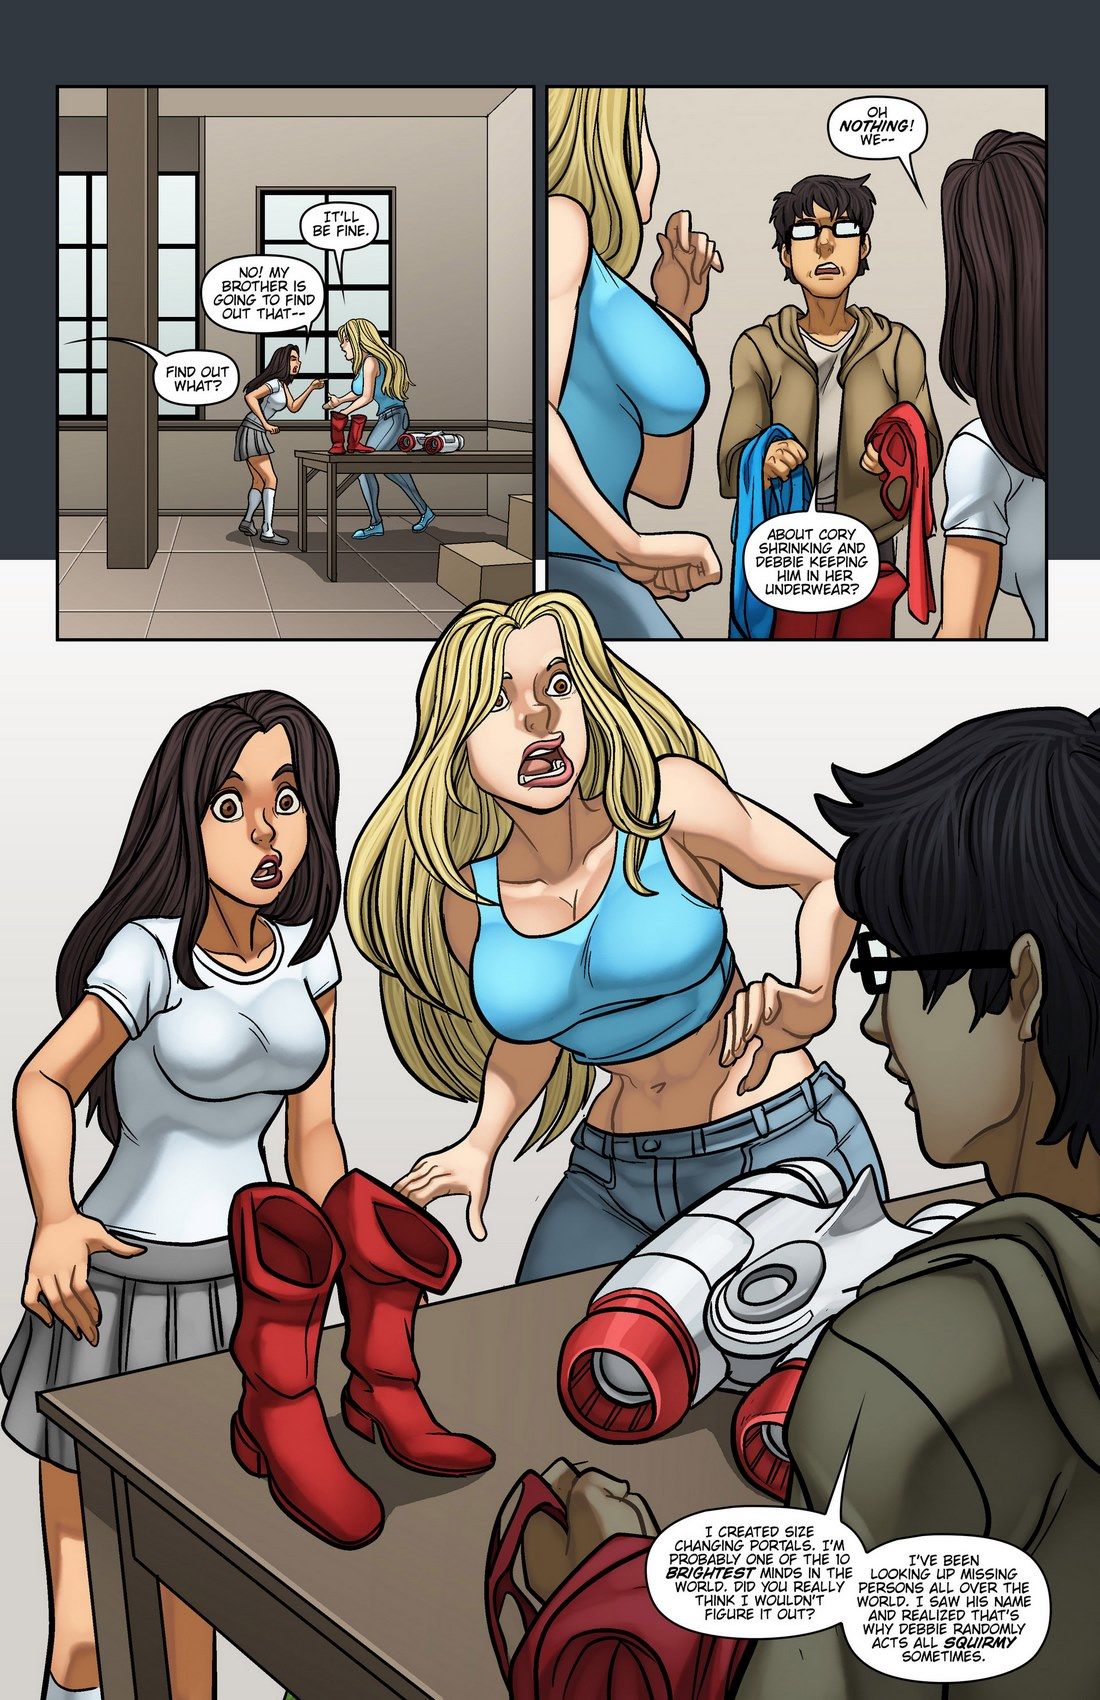 Portals Issue 6 Size Fight (GiantessFan) page 3